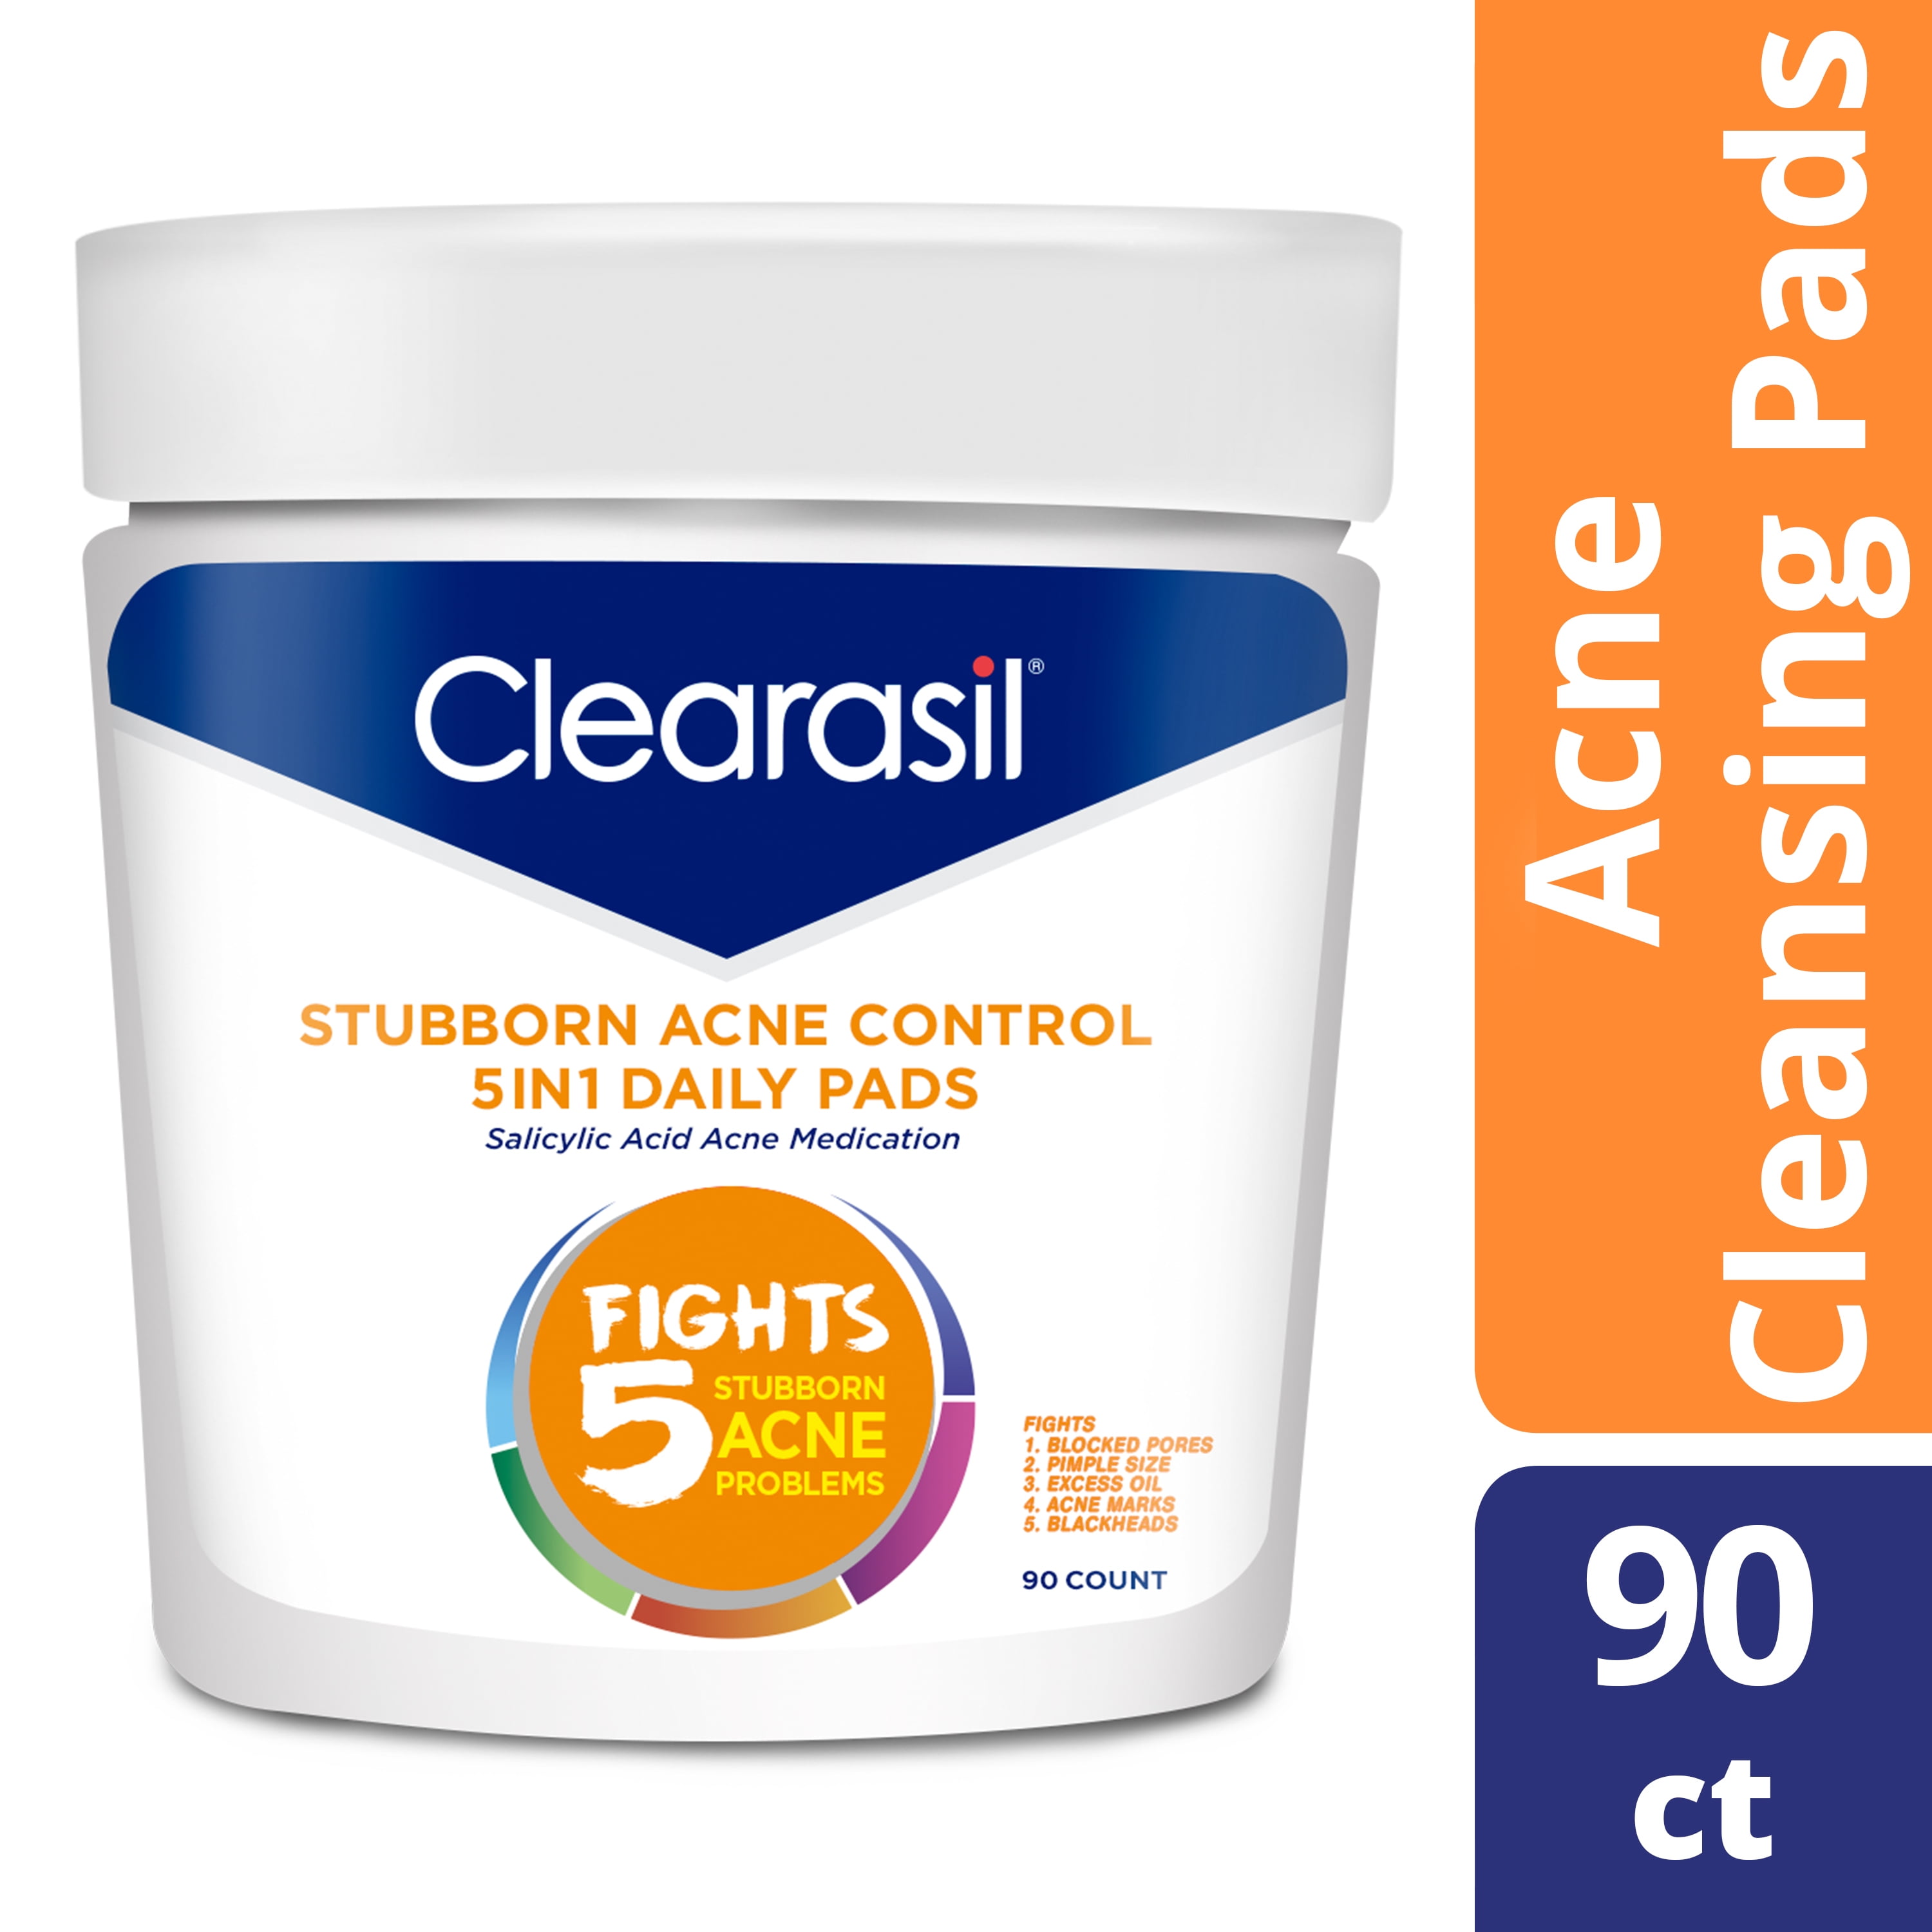 Clearasil Stubborn Acne Control 5in1 Daily Facial Cleansing Pads, with Salicylic Acid Acne Treatment Medicine, 90 Count